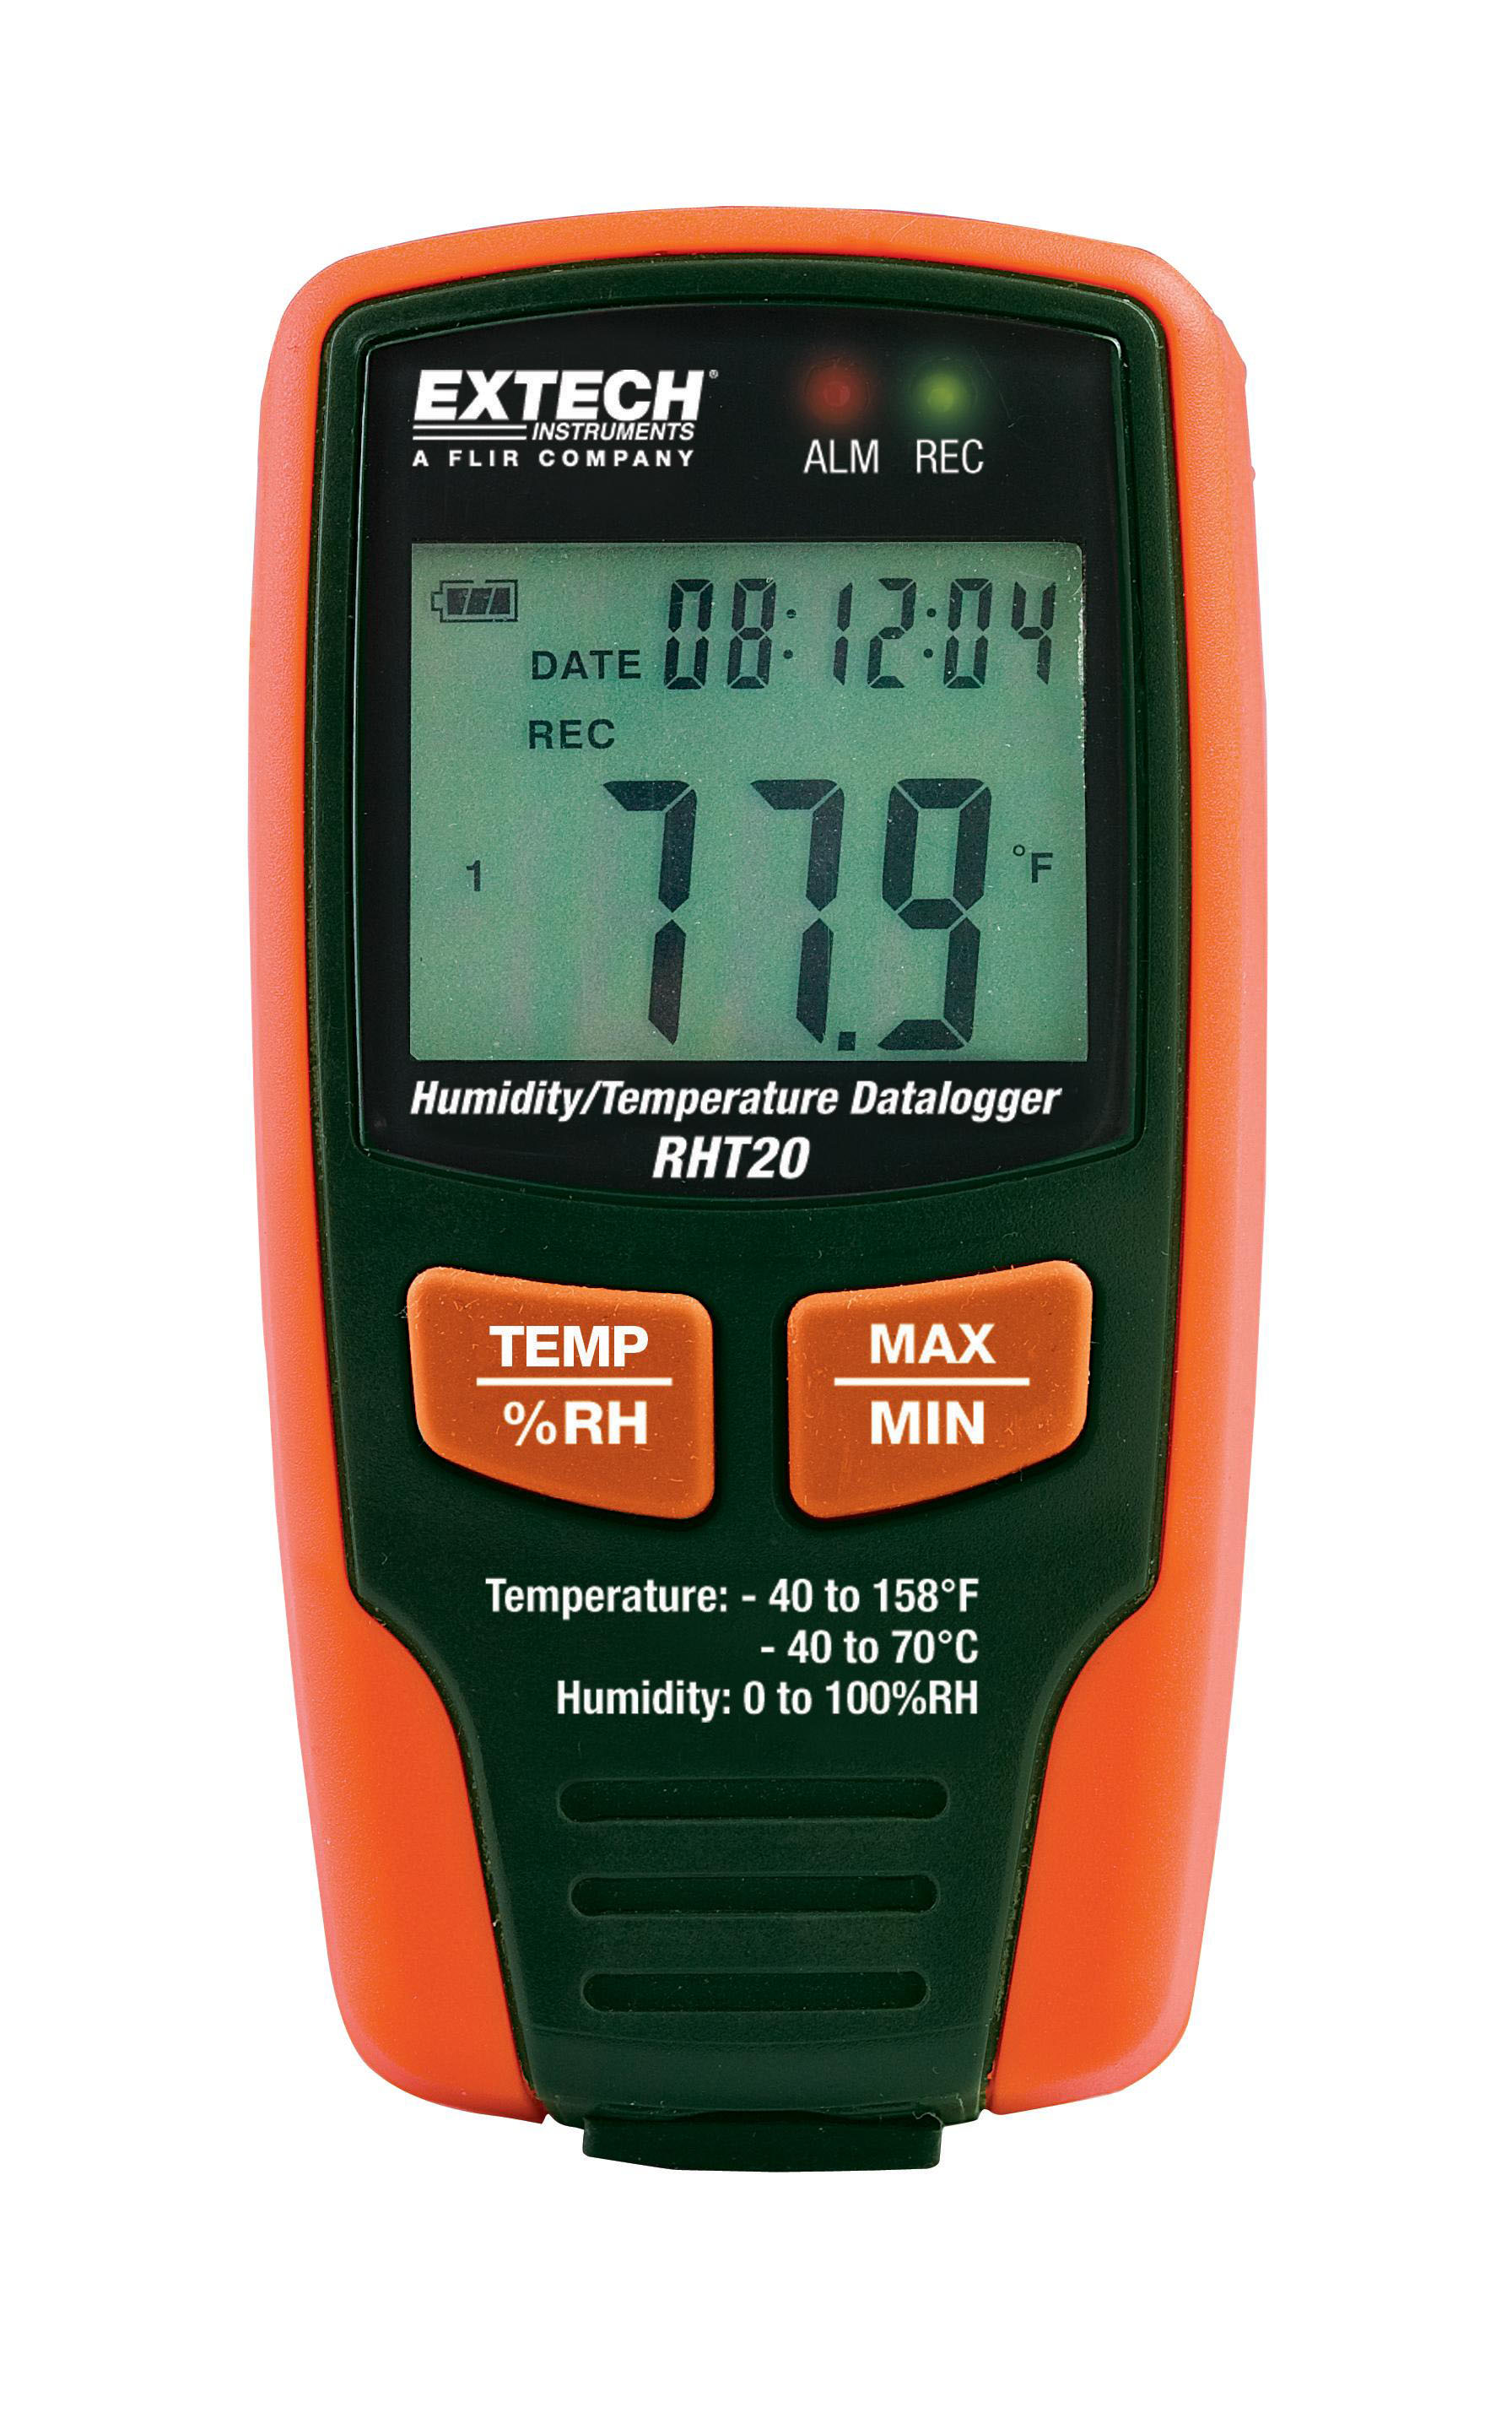 Temperature and Humidity Dataloggers